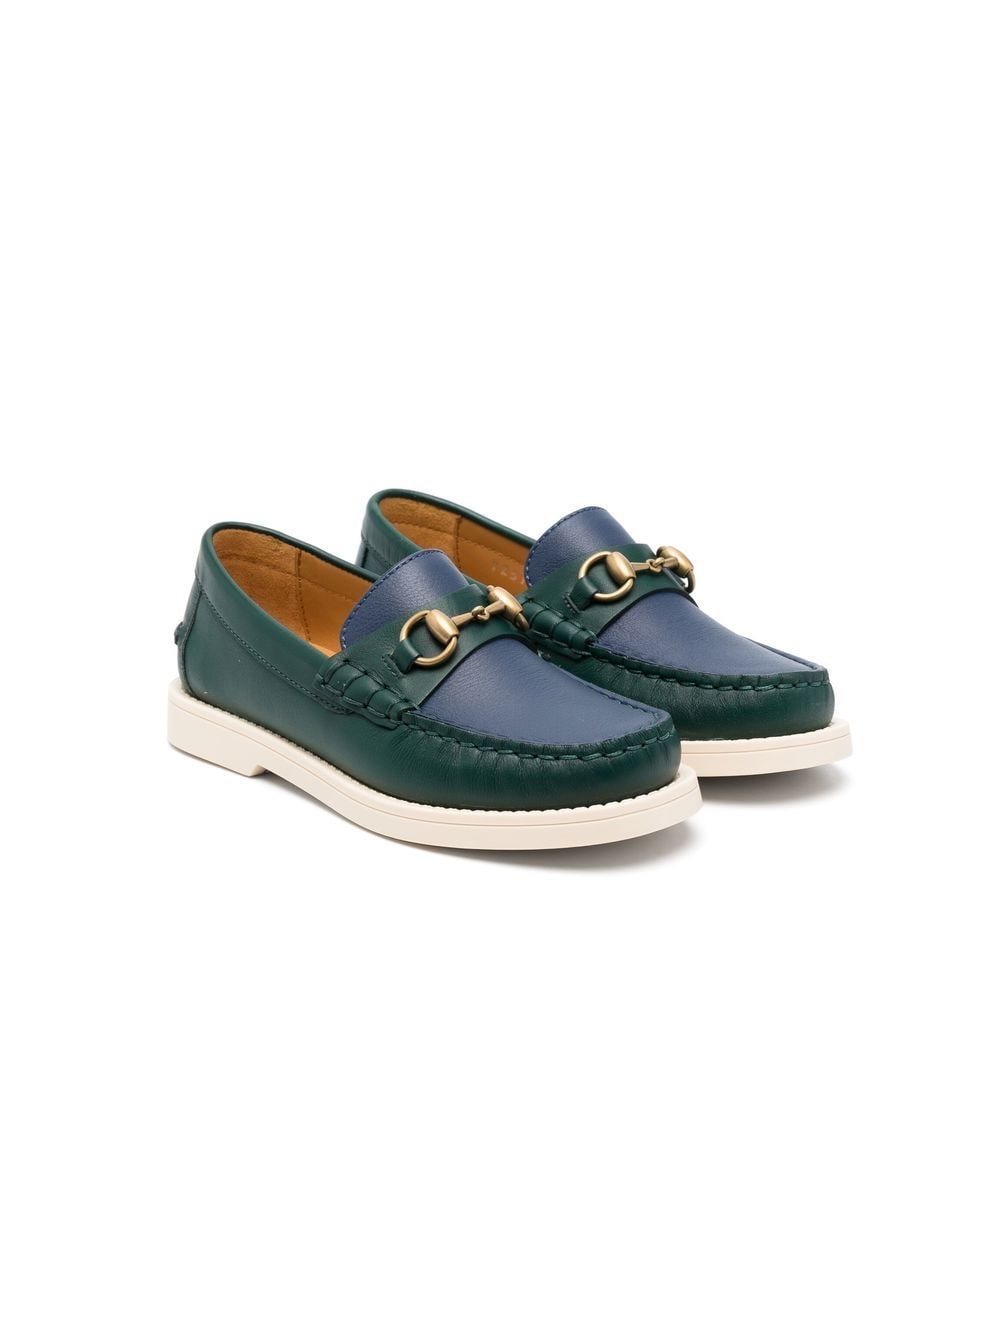 Gucci Kids plain leather loafers - Green